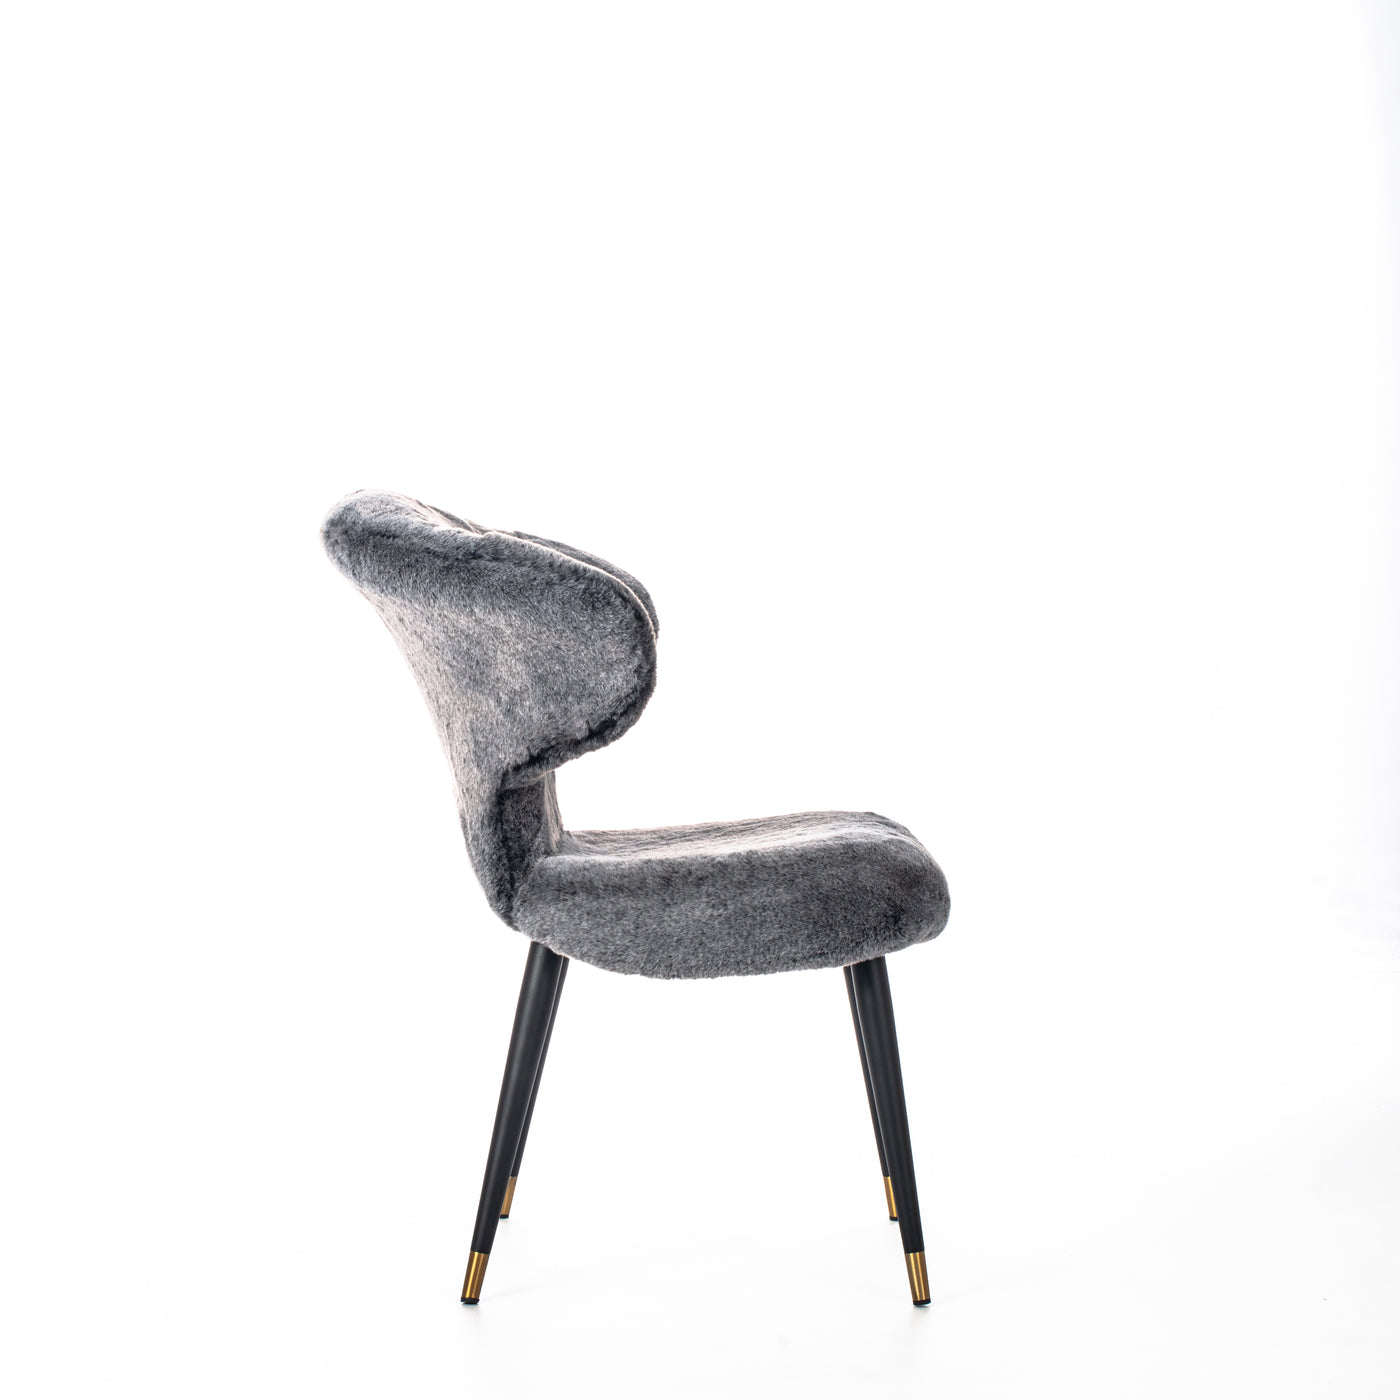 ISIDE gray chair